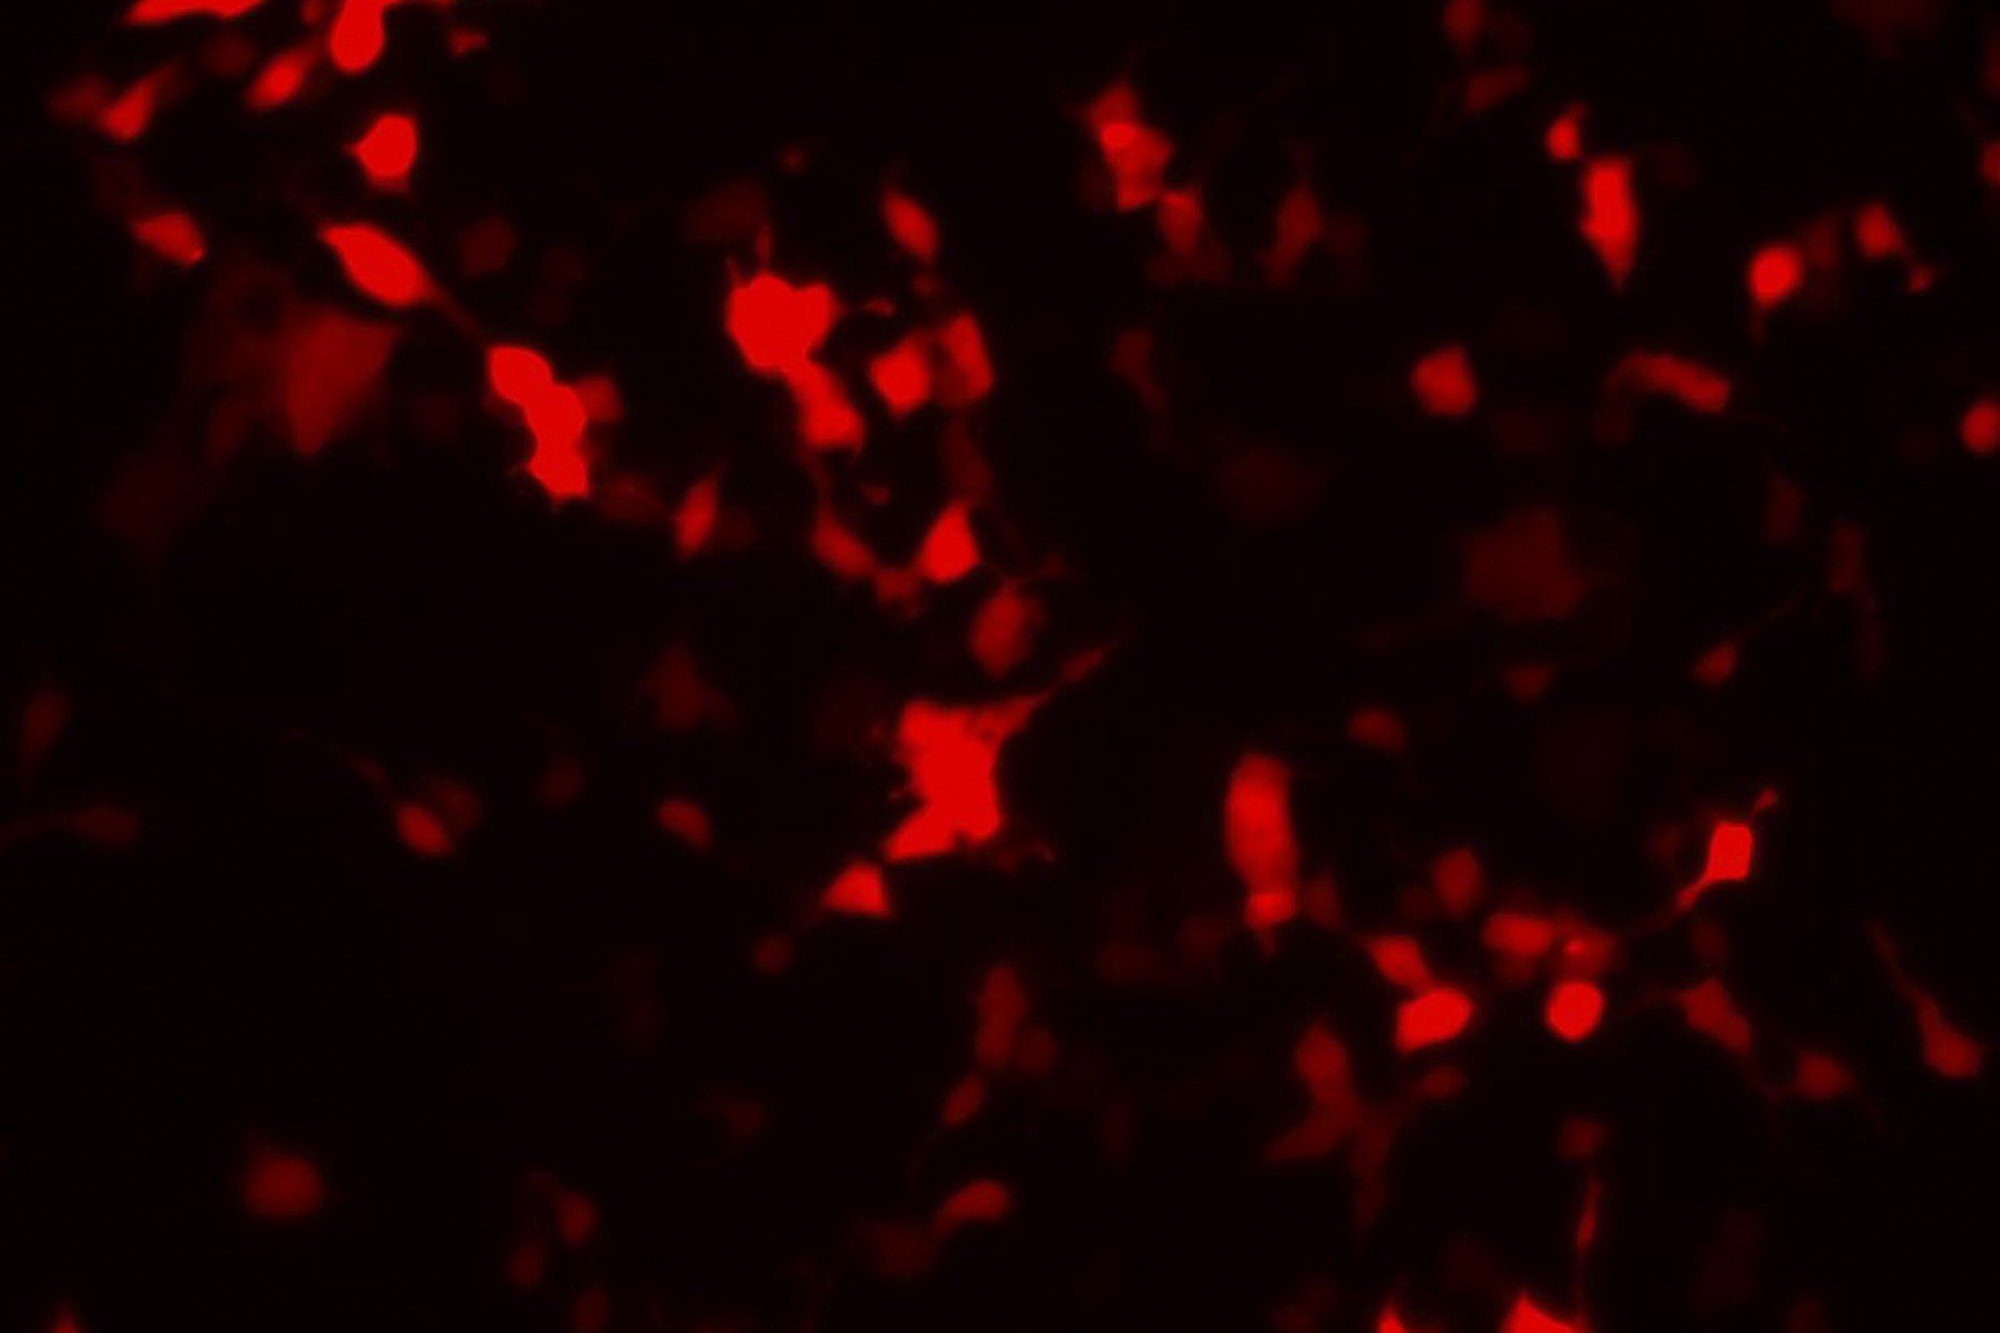 green biosensor cells that are red.  Look like speckles of red on a black background